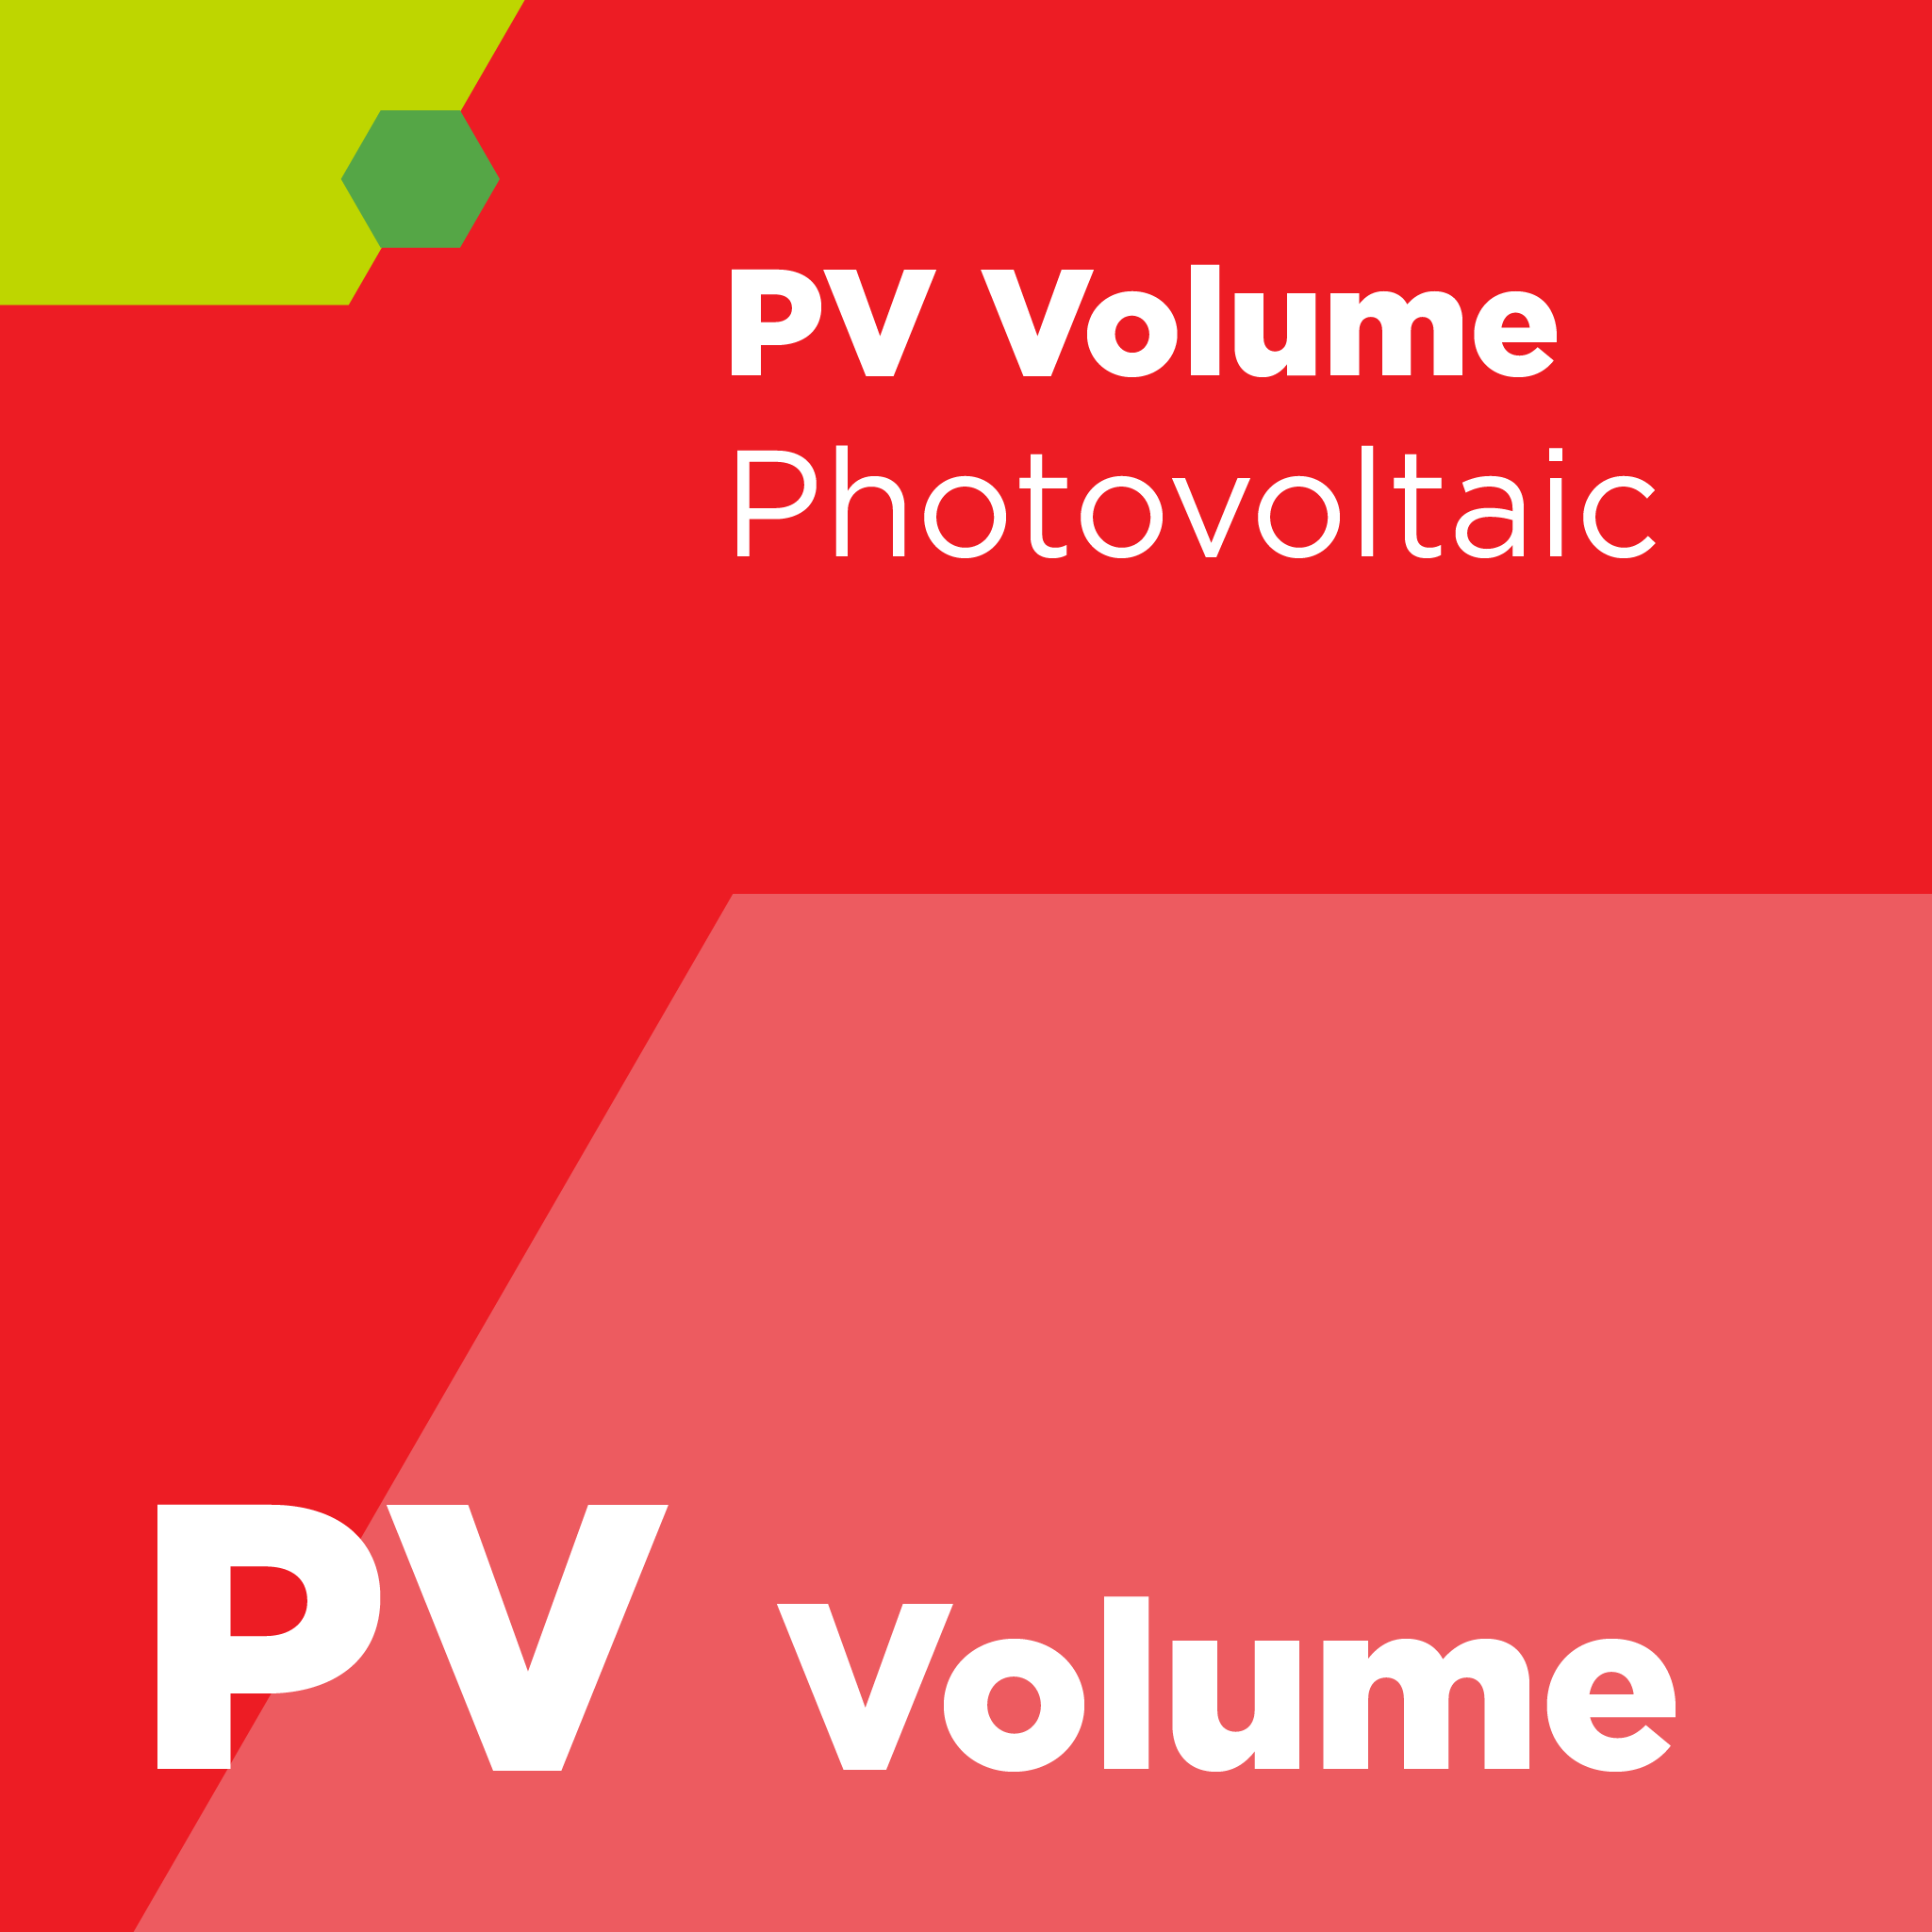 PV09100 - SEMI PV91 - Specification for Trichlorosilane Used in Polysilicon Production